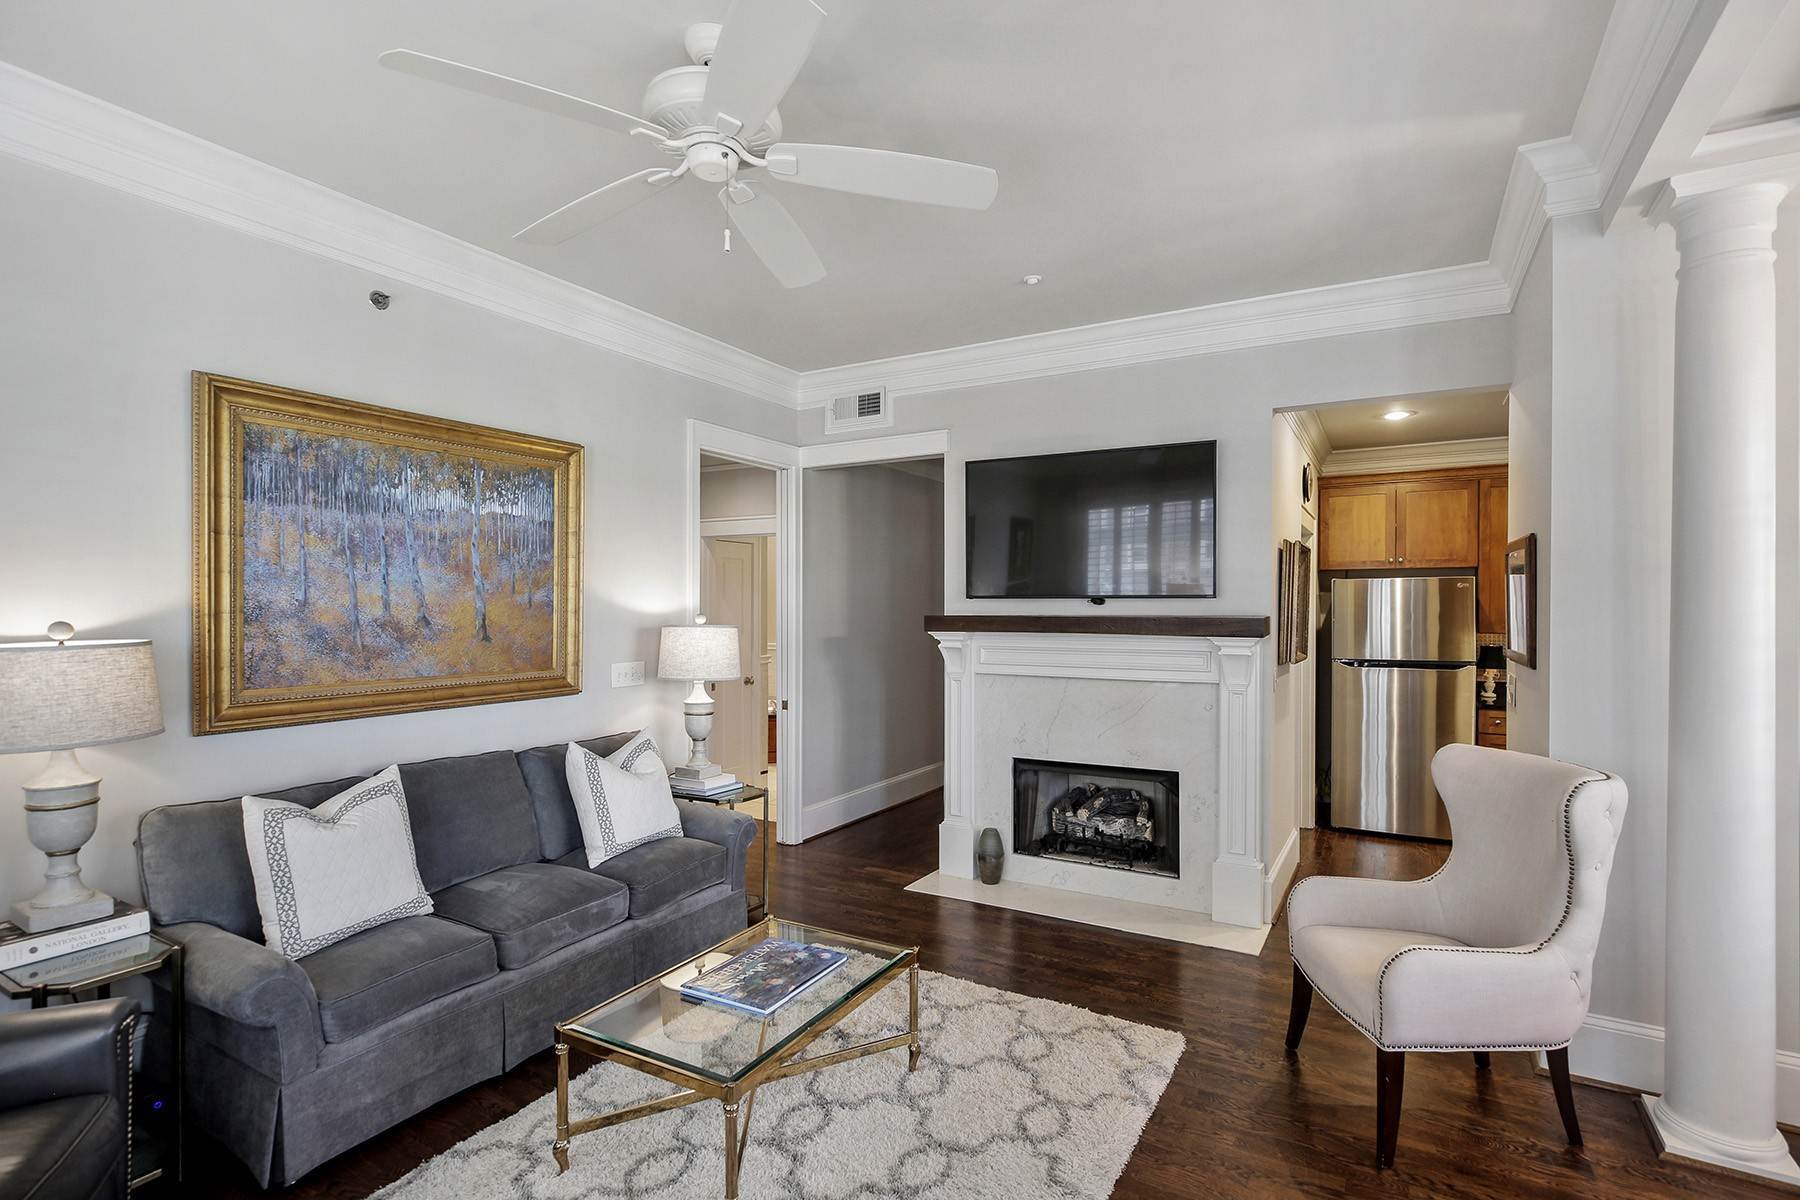 Condominiums for Sale at Exquisite Finishes in this Two Bedroom Condo in Midtown's Cotting Court 77 Peachtree Place, No. 311 Atlanta, Georgia 30309 United States